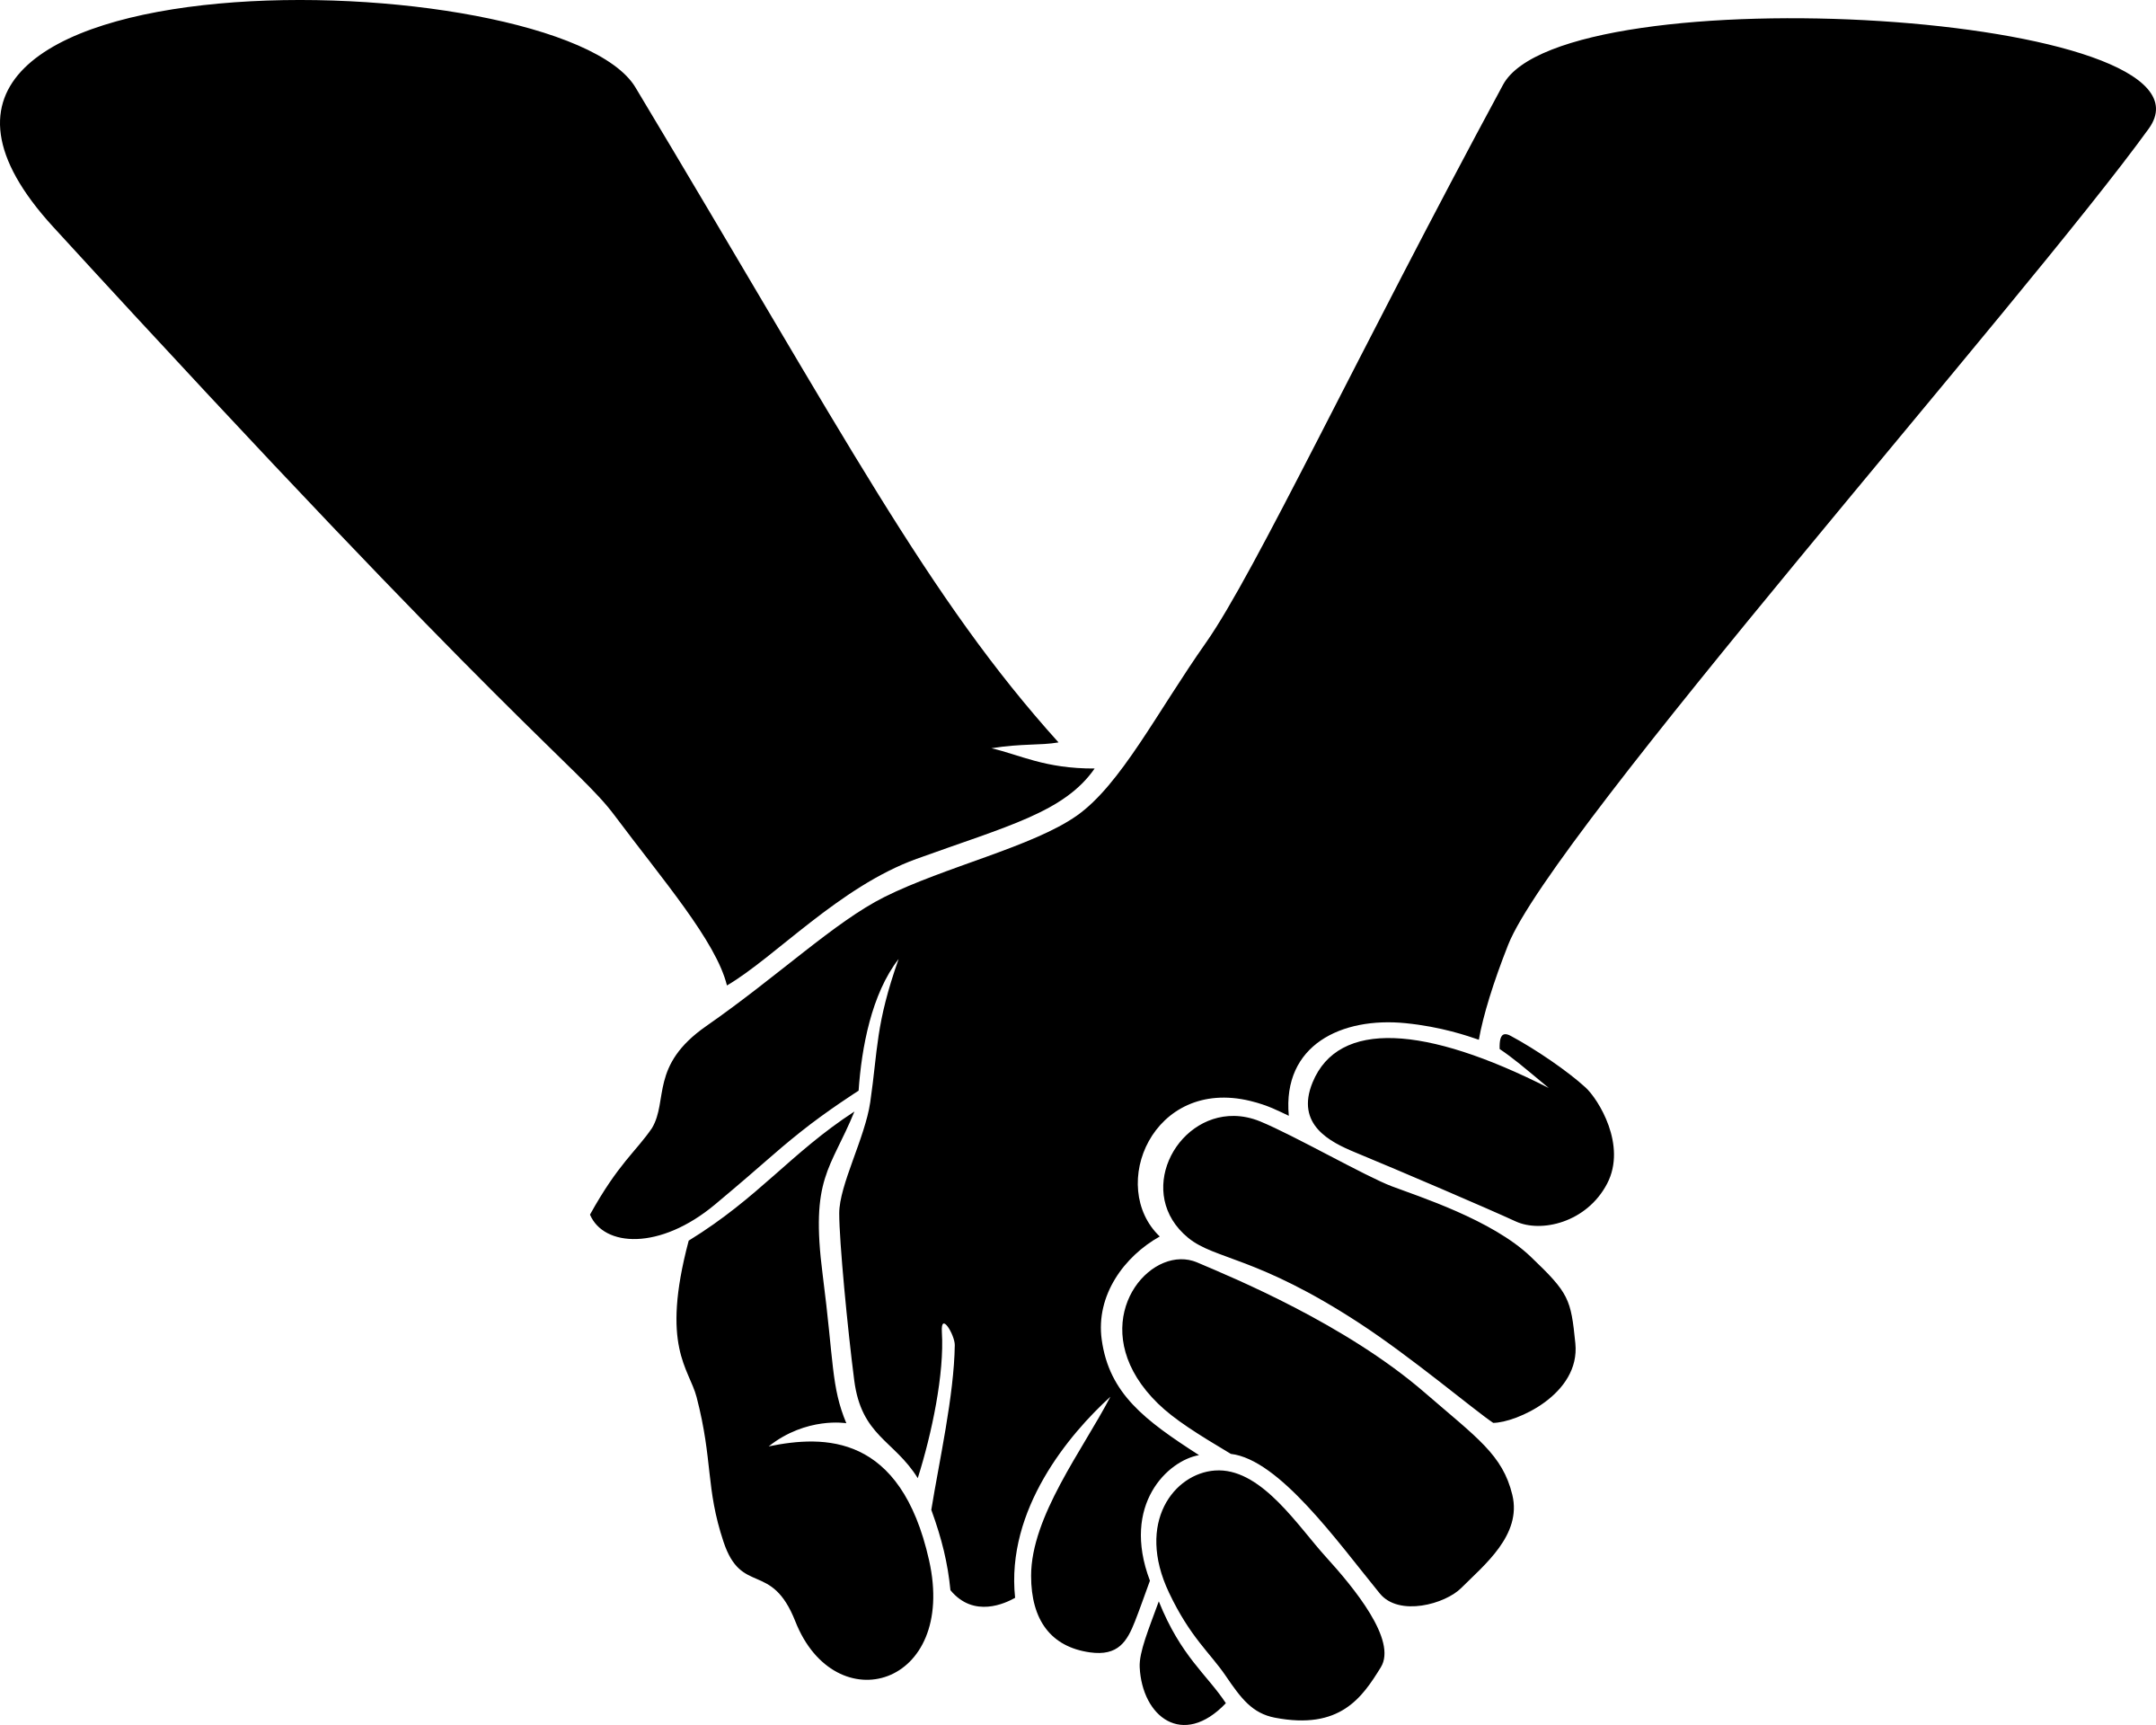 Hands holding clipart.